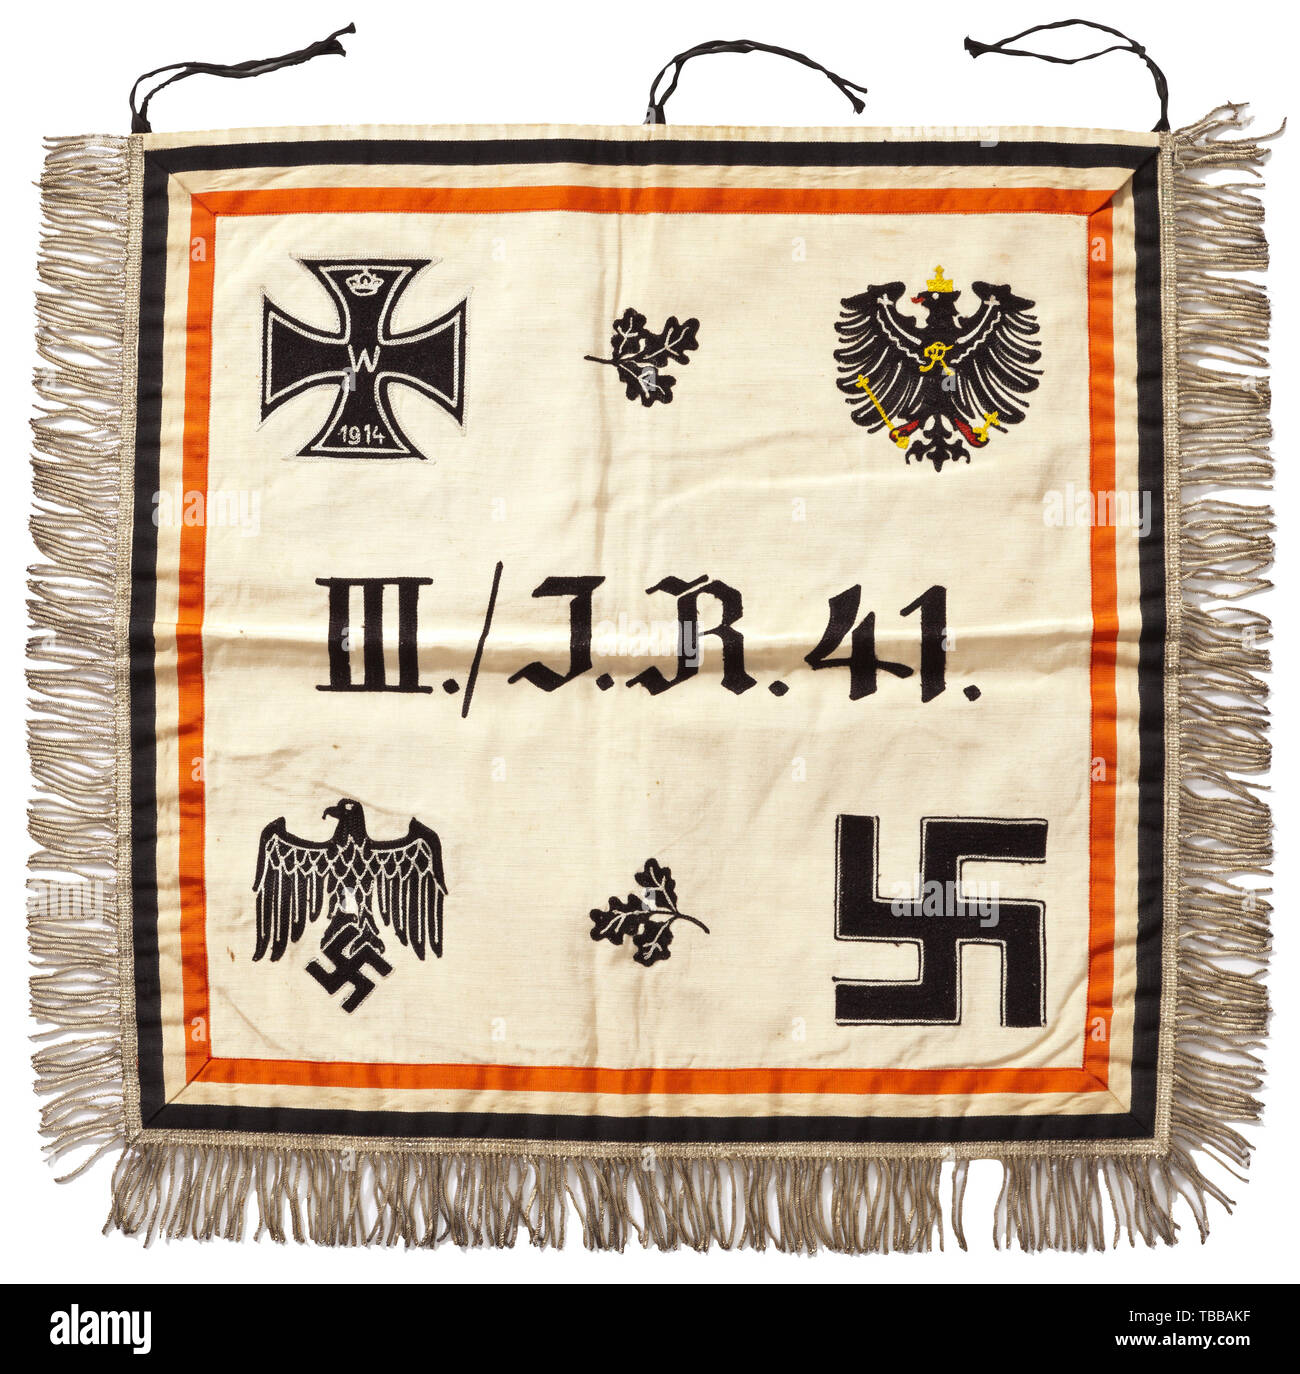 A trumpet and drum hanging of the Kyffhäuser-Bund, Infantry Regiment No. 41, Light silk cloth trimmed in black-white-red rep ribbon, both sides with rich chain stitched embroidery in black, white, yellow and red, silver fringe on three sides. The obverse bears the inscription 'III./I.R.41.' (III Battalion IR 41 stationed in Oberpfalz), encircled by Iron Crosses, oak leaves, Prussian and army eagles as well as the swastika, the reverse with the crest of the Kyffhäuser-Bund. Dimensions circa 50 x 50 cm. Also included is a drum hanging of the same unit in fine grey felt (black, Editorial-Use-Only Stock Photo